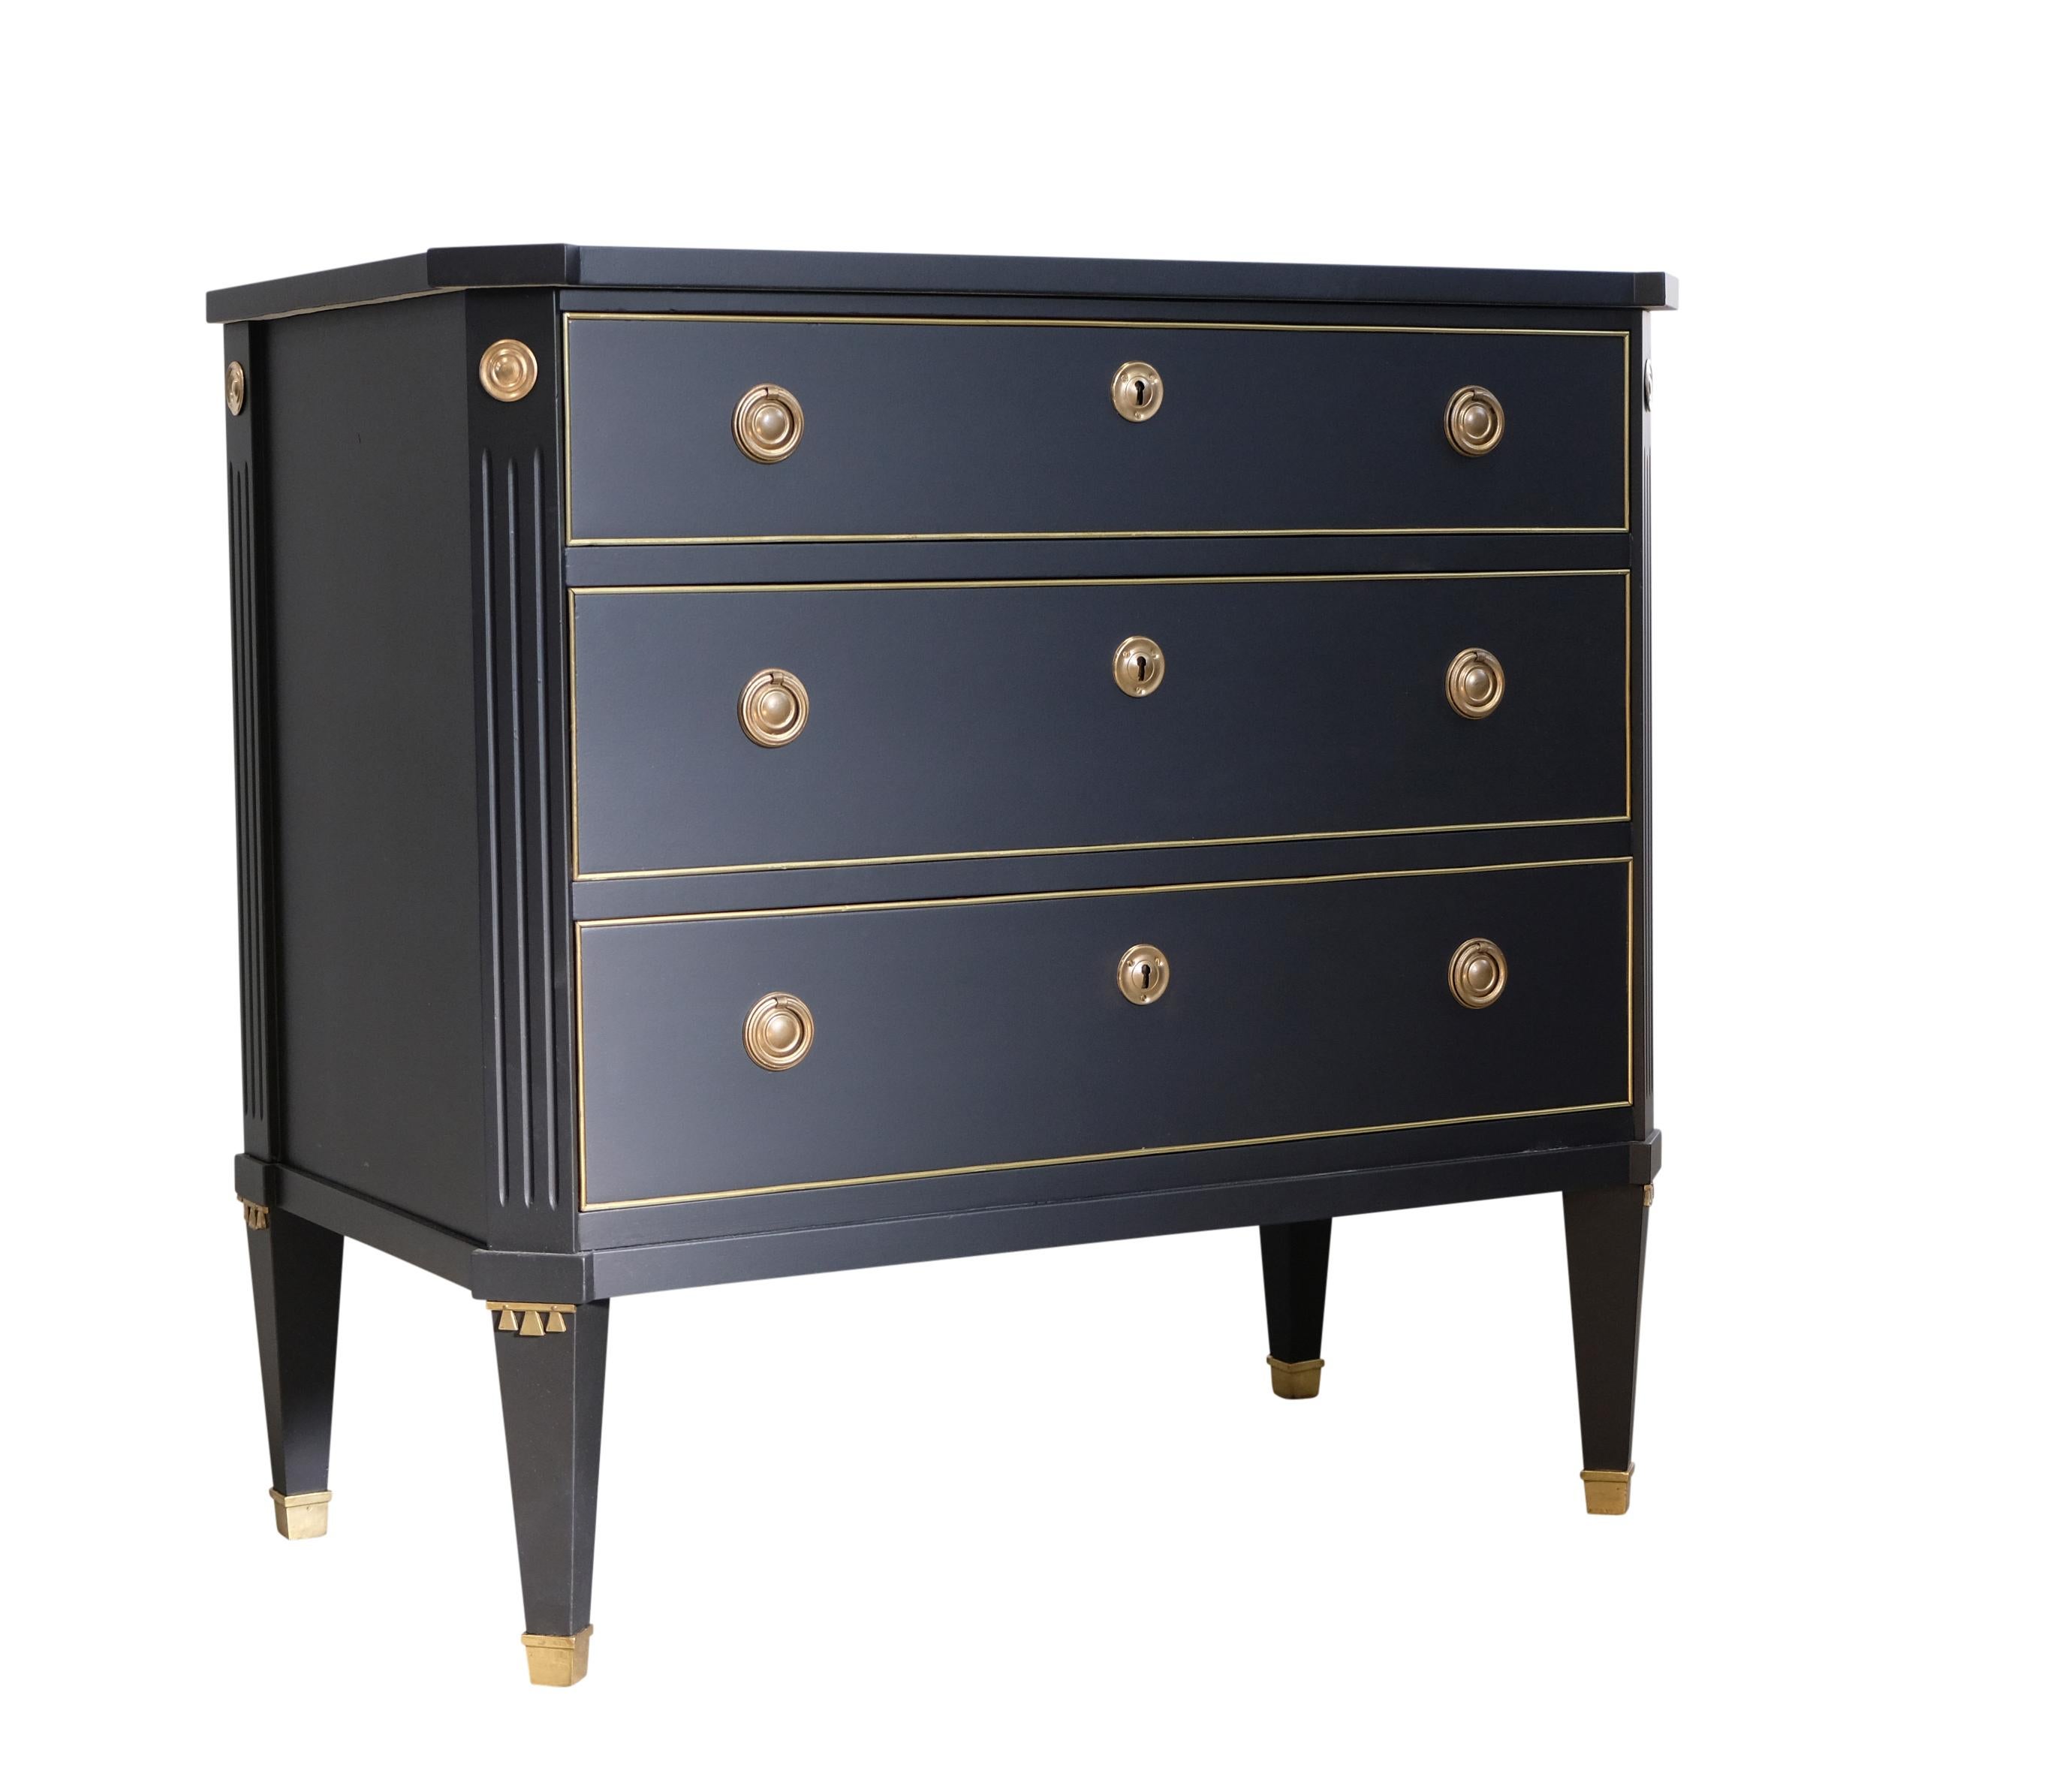 Gustavian dresser renovated to super condition in super finish black to the highest standard. Fine moldings around drawers and fittings in solid brass.  Marble top

Width 86 cm / 33.9